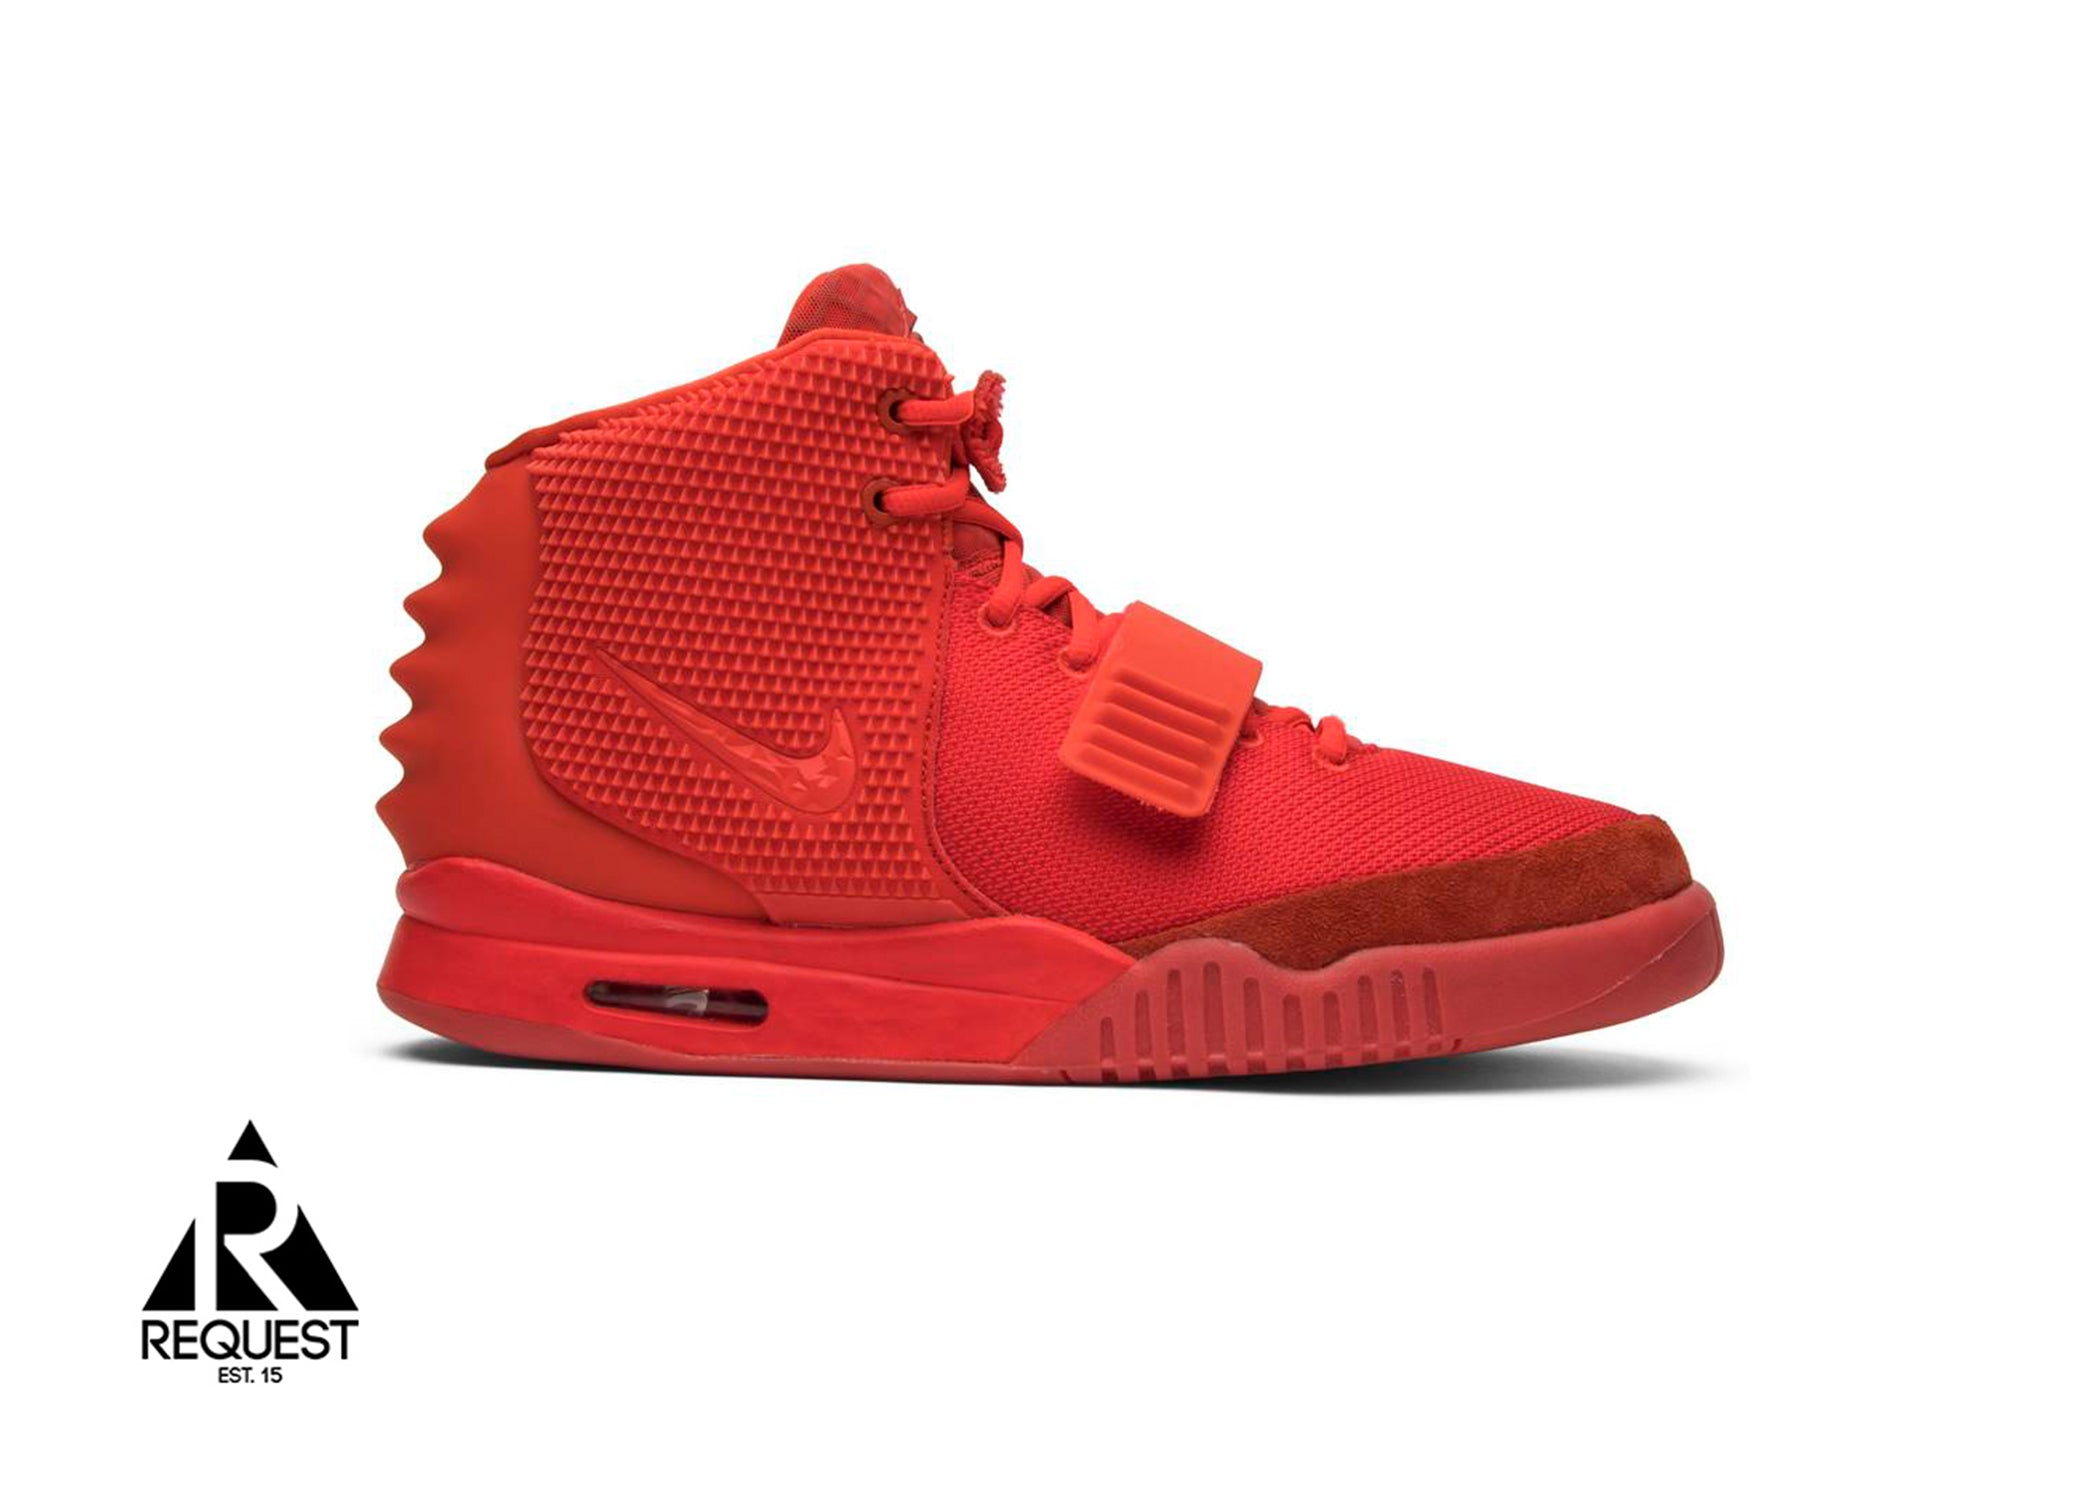 Nike Air Yeezy 2 “Red October”